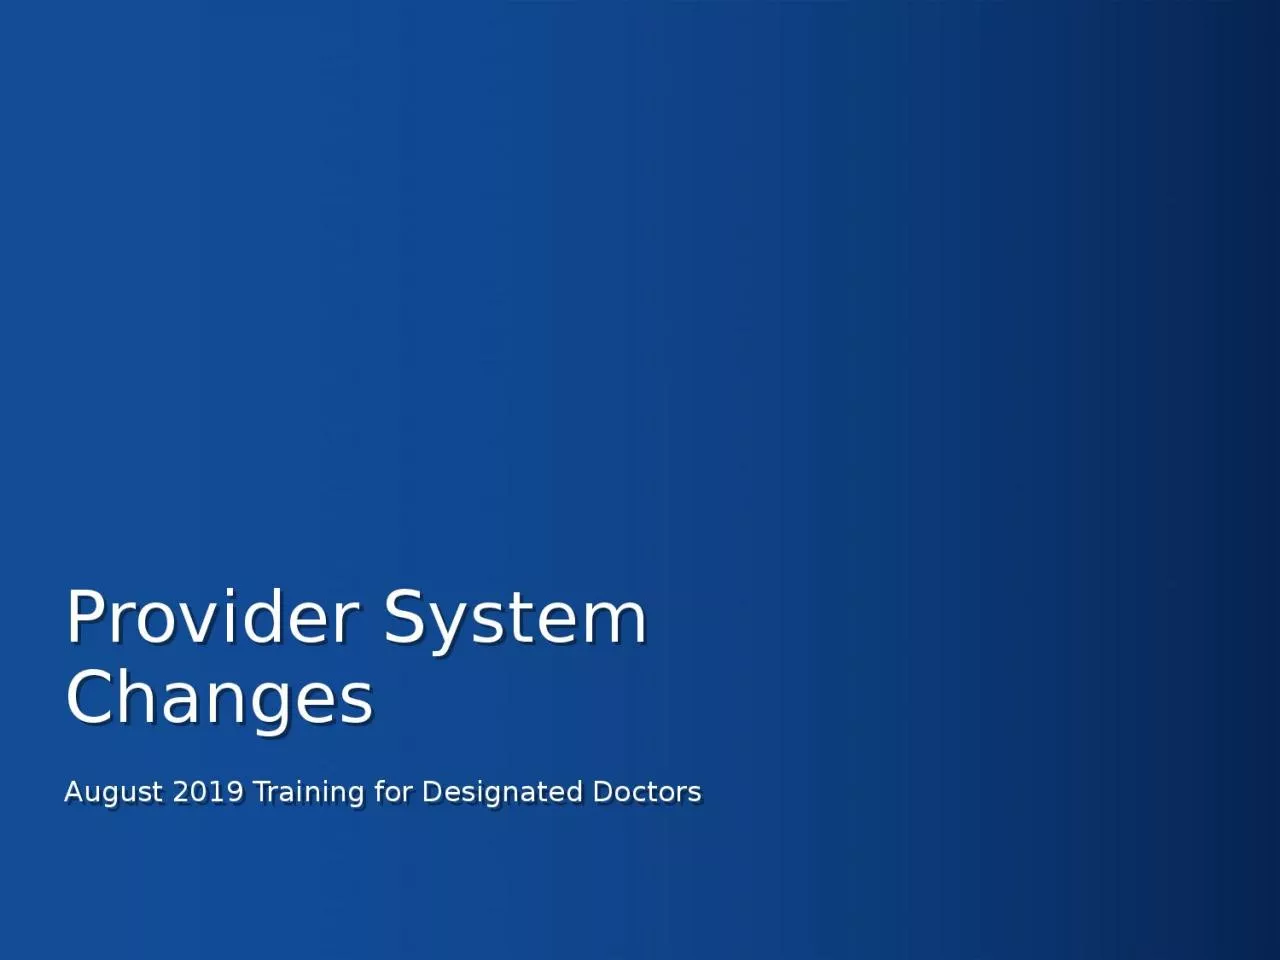 Provider System Changes August 2019 Training for Designated Doctors